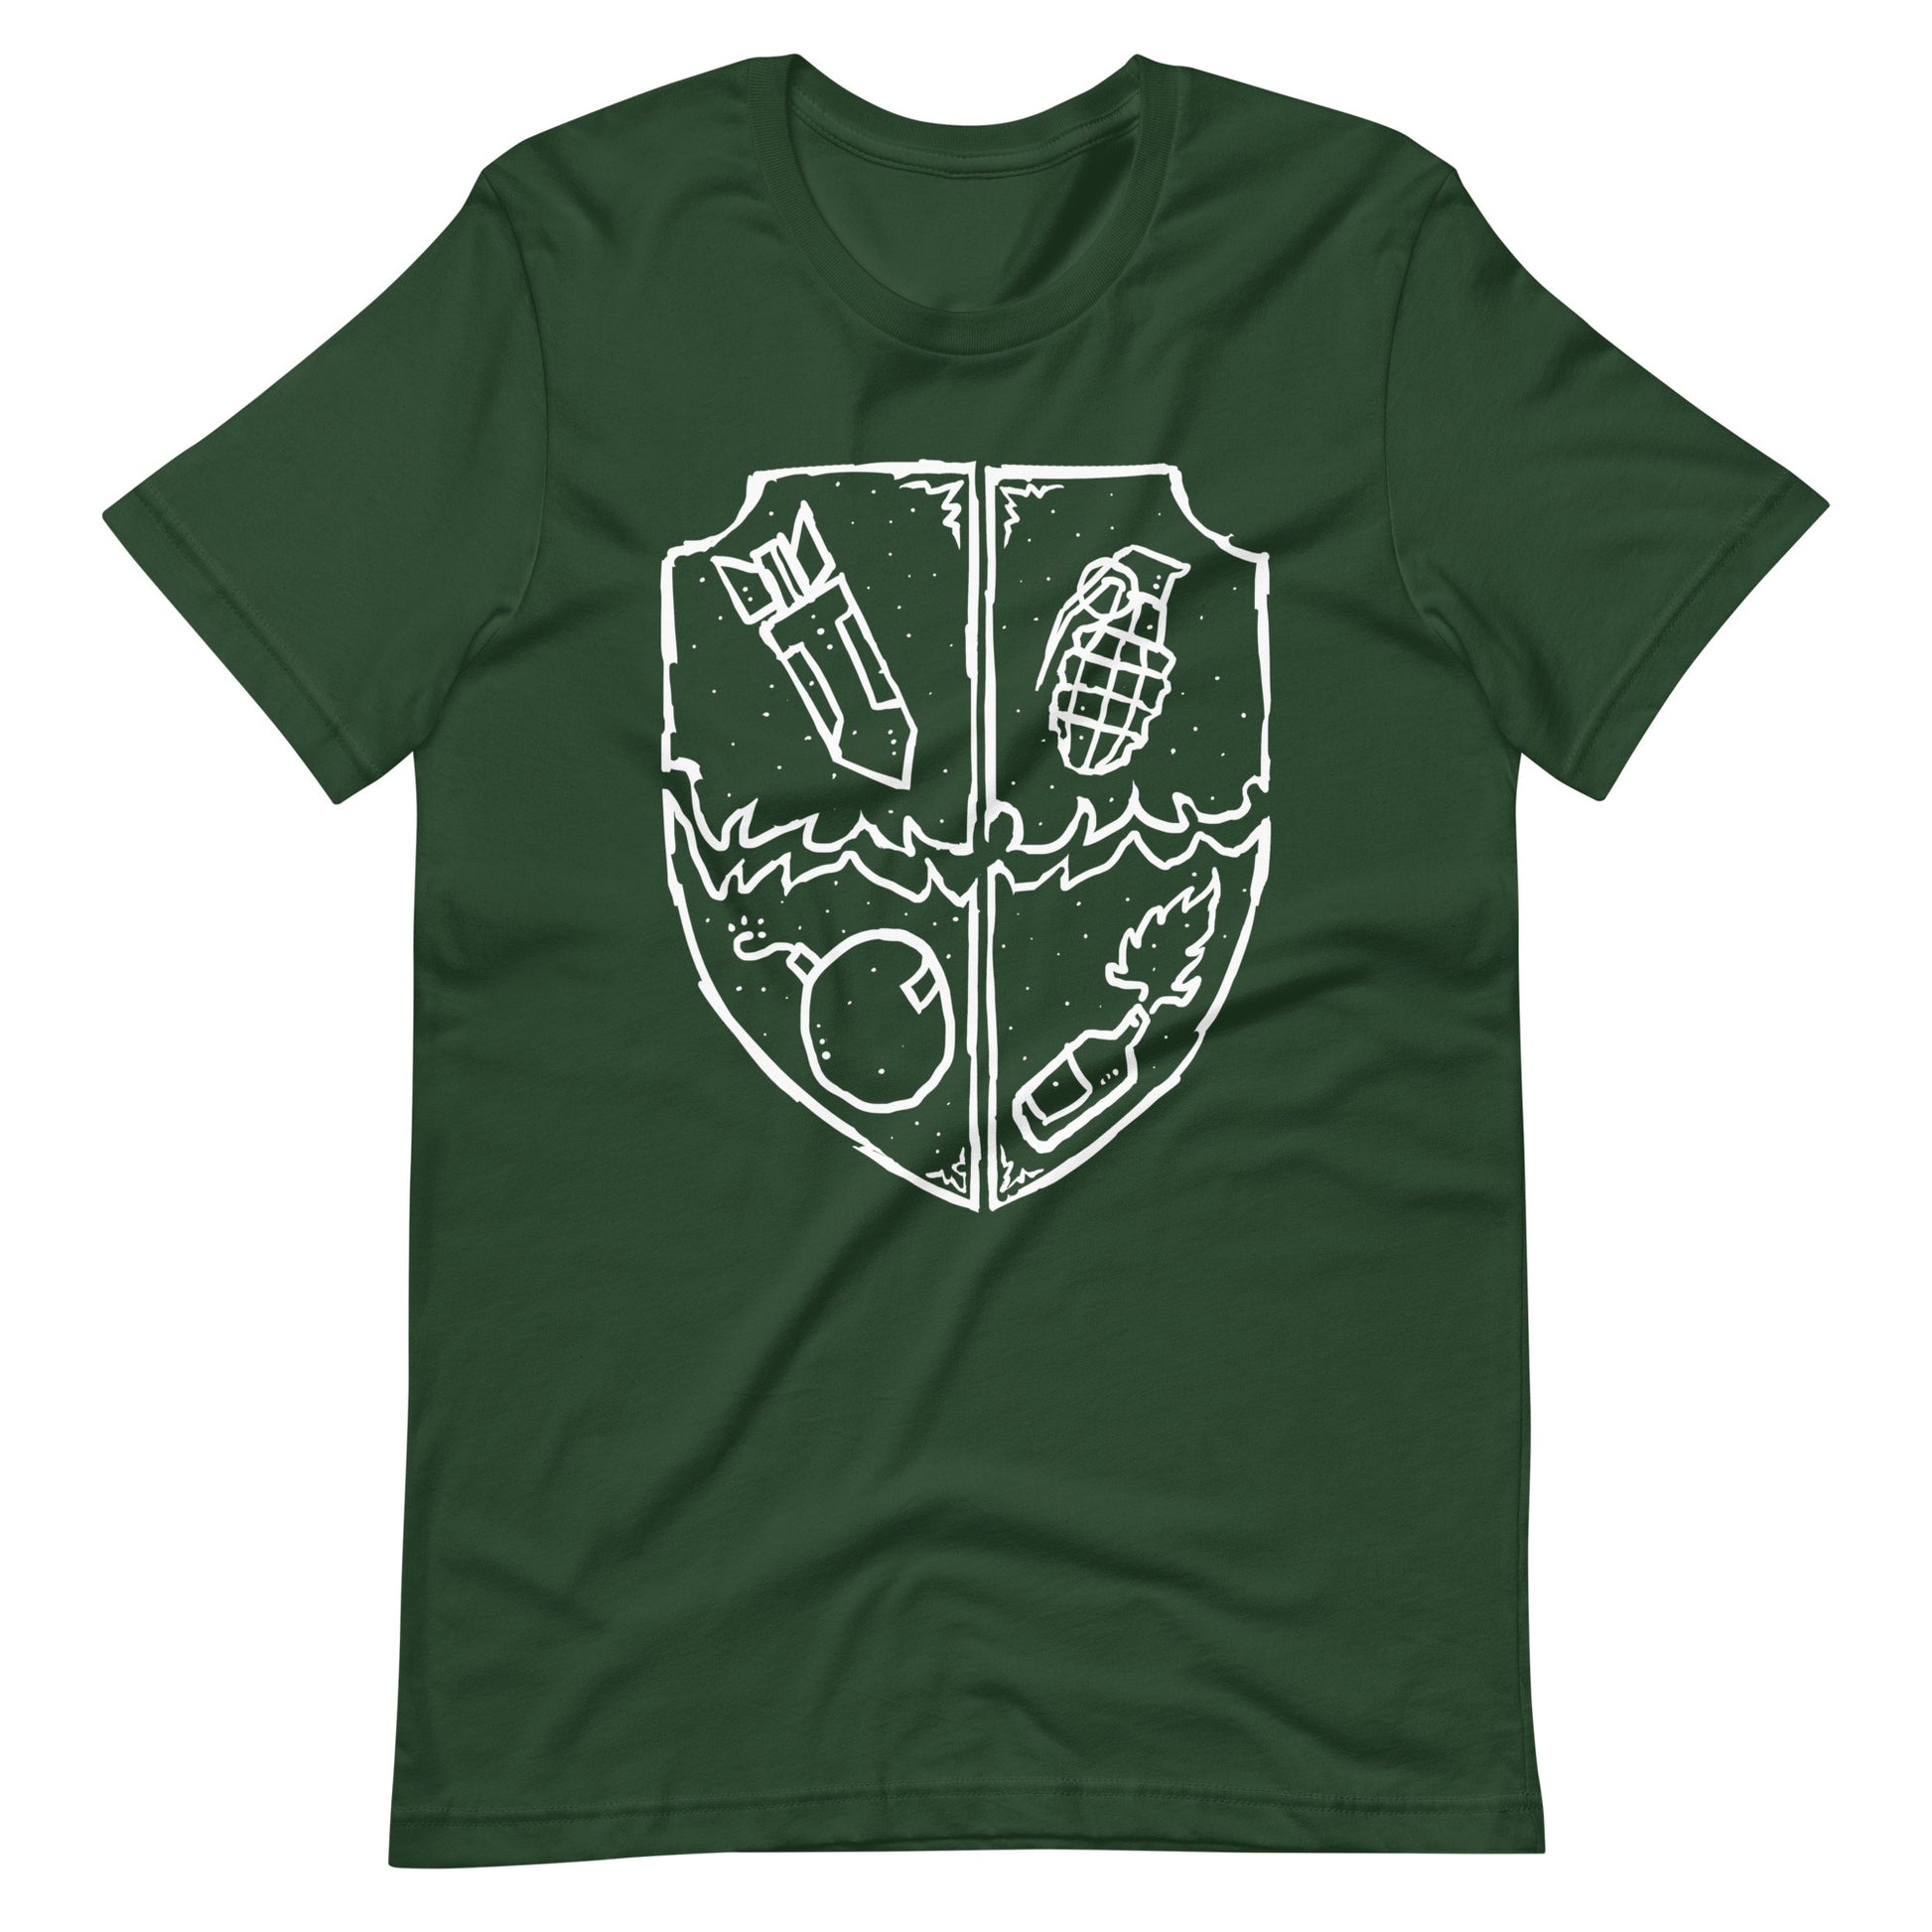 Boom - Men's t-shirt - Forest Front